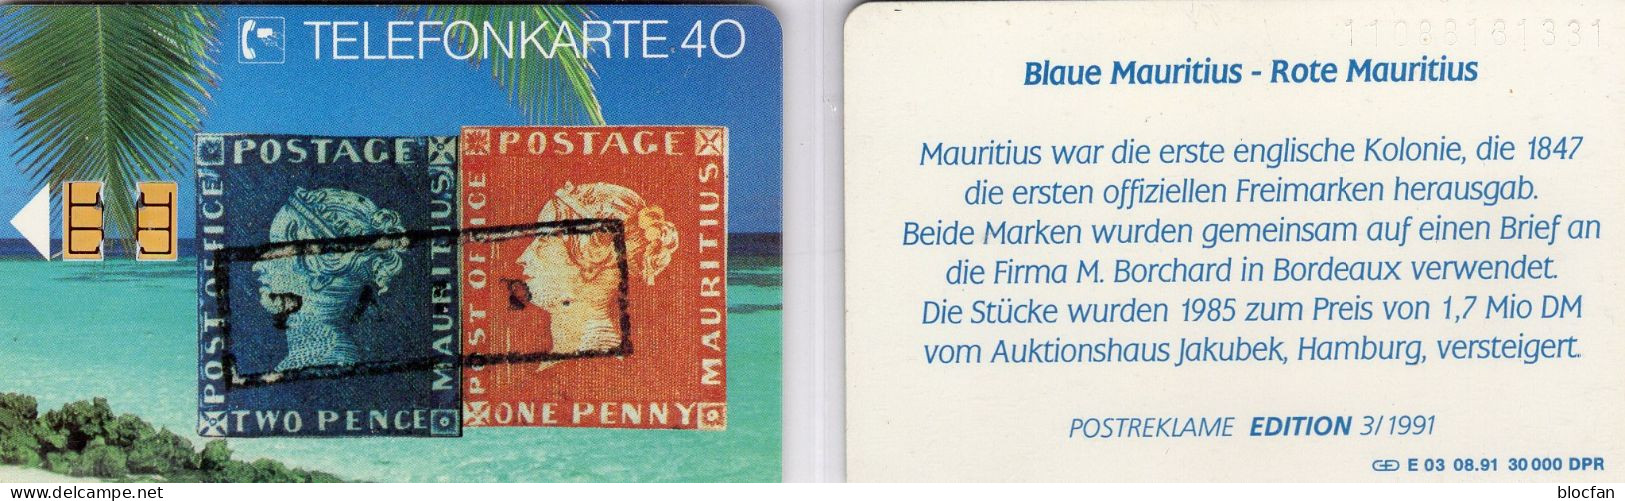 Blaue/rote Mauritius TK E03/1991 30.000Expl. ** 25€ Edition1 Kolonie Der UK/GB TC History Stamps On Phonecard Of Germany - E-Series: Editionsausgabe Der Dt. Postreklame